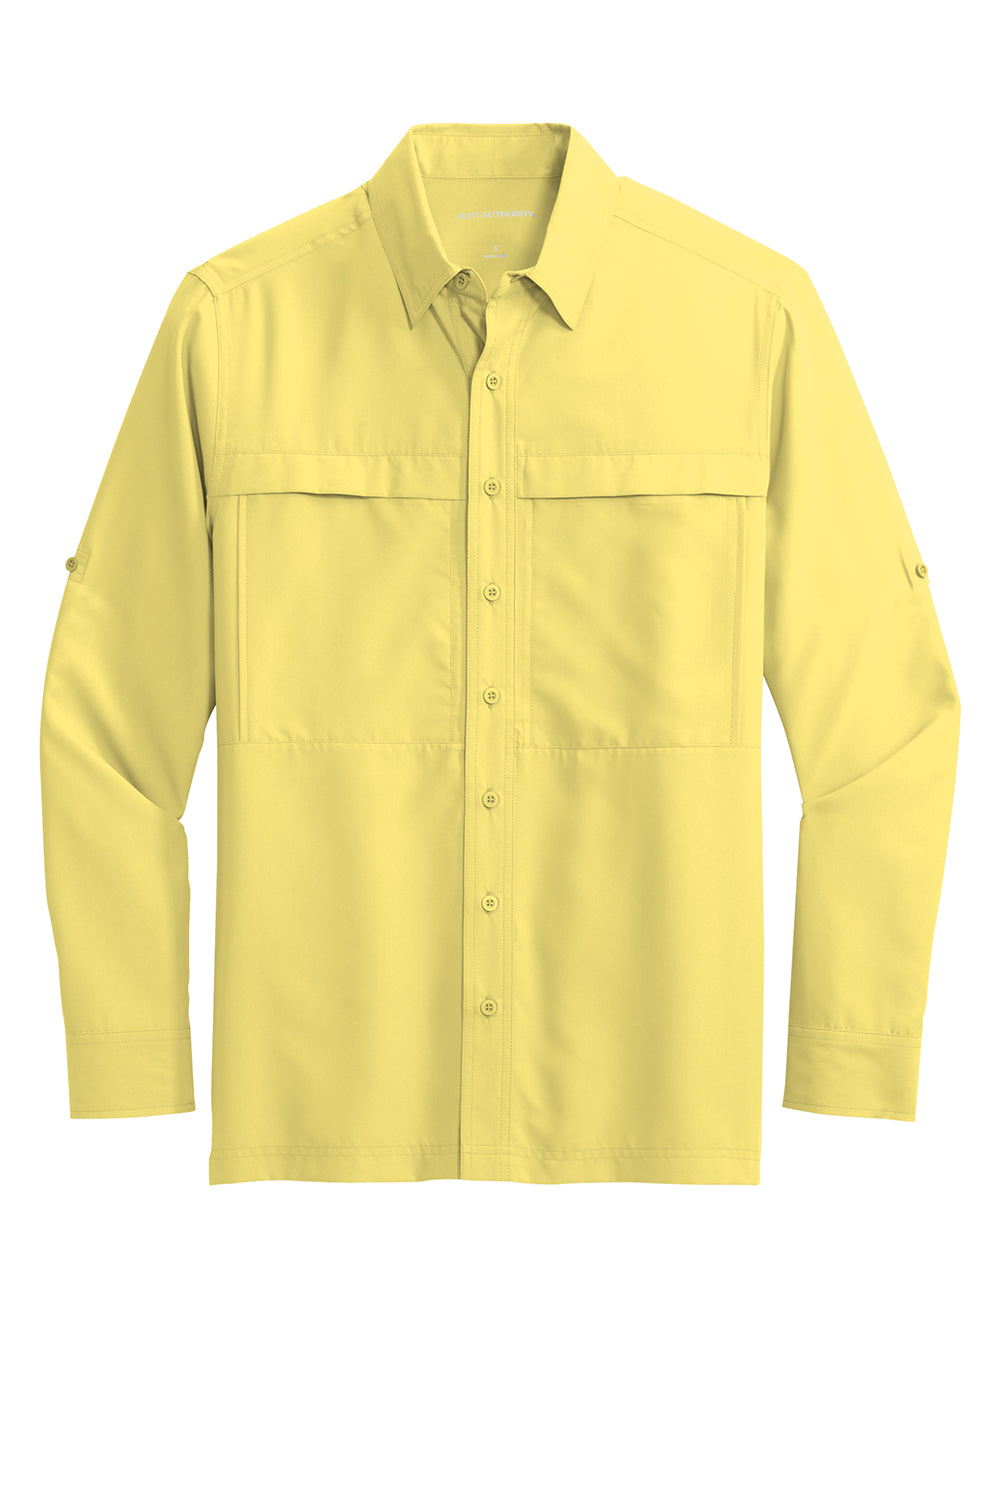 Port Authority W960 Mens Daybreak Moisture Wicking Long Sleeve Button Down Shirt w/ Double Pockets Yellow Flat Front